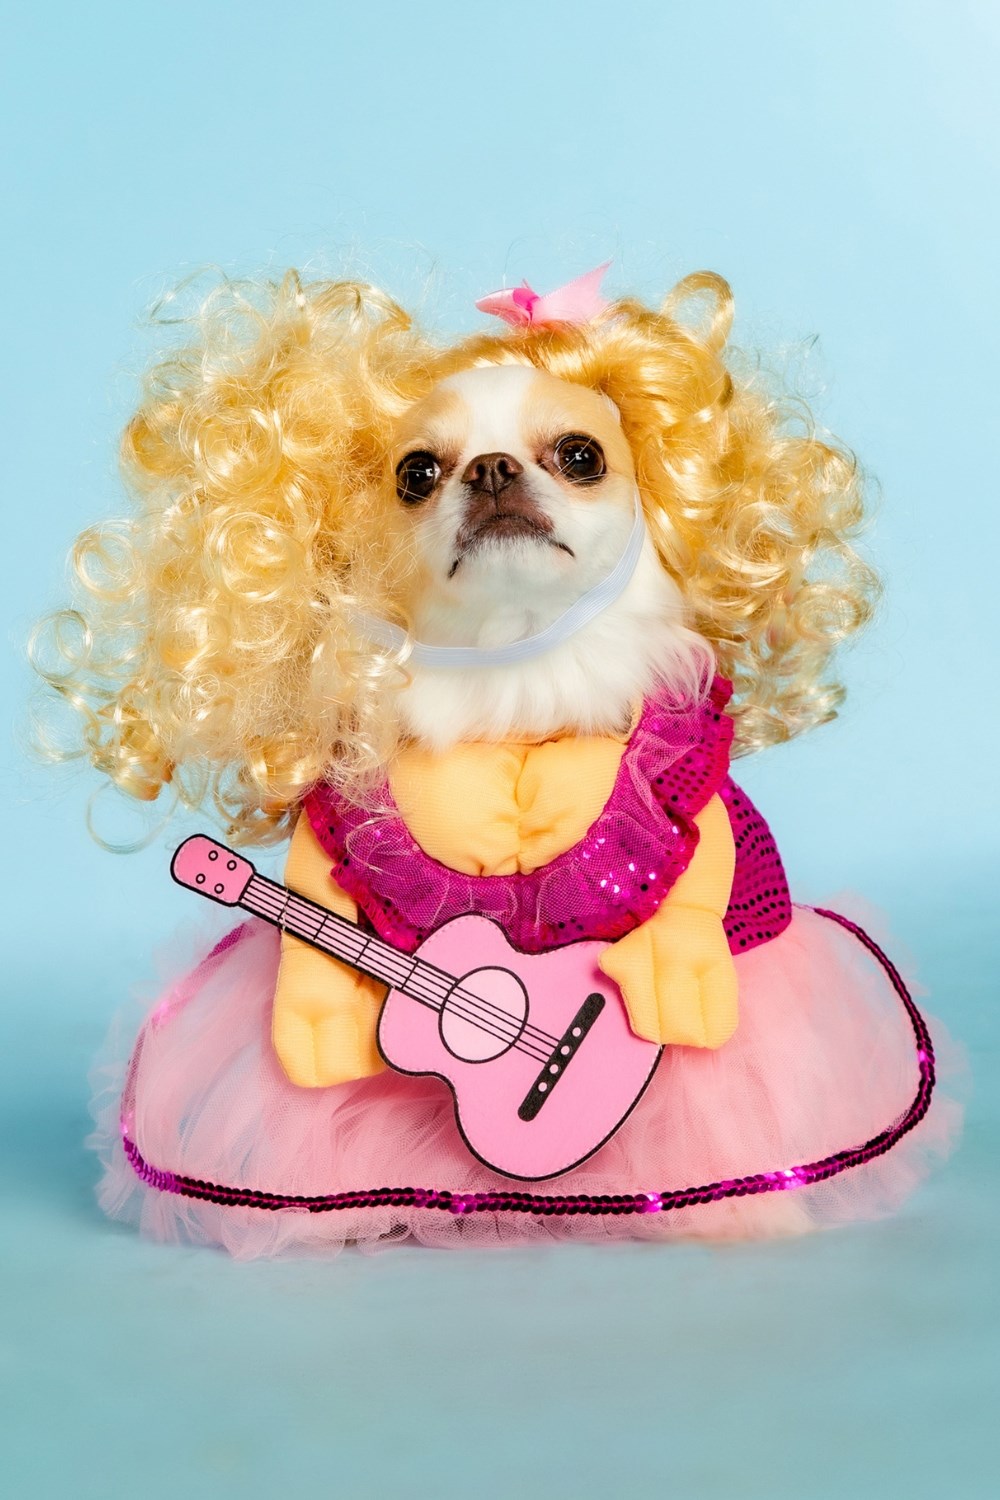 Petbarn's Dolly Parton Pet Apparel And Toys | Better Homes and Gardens